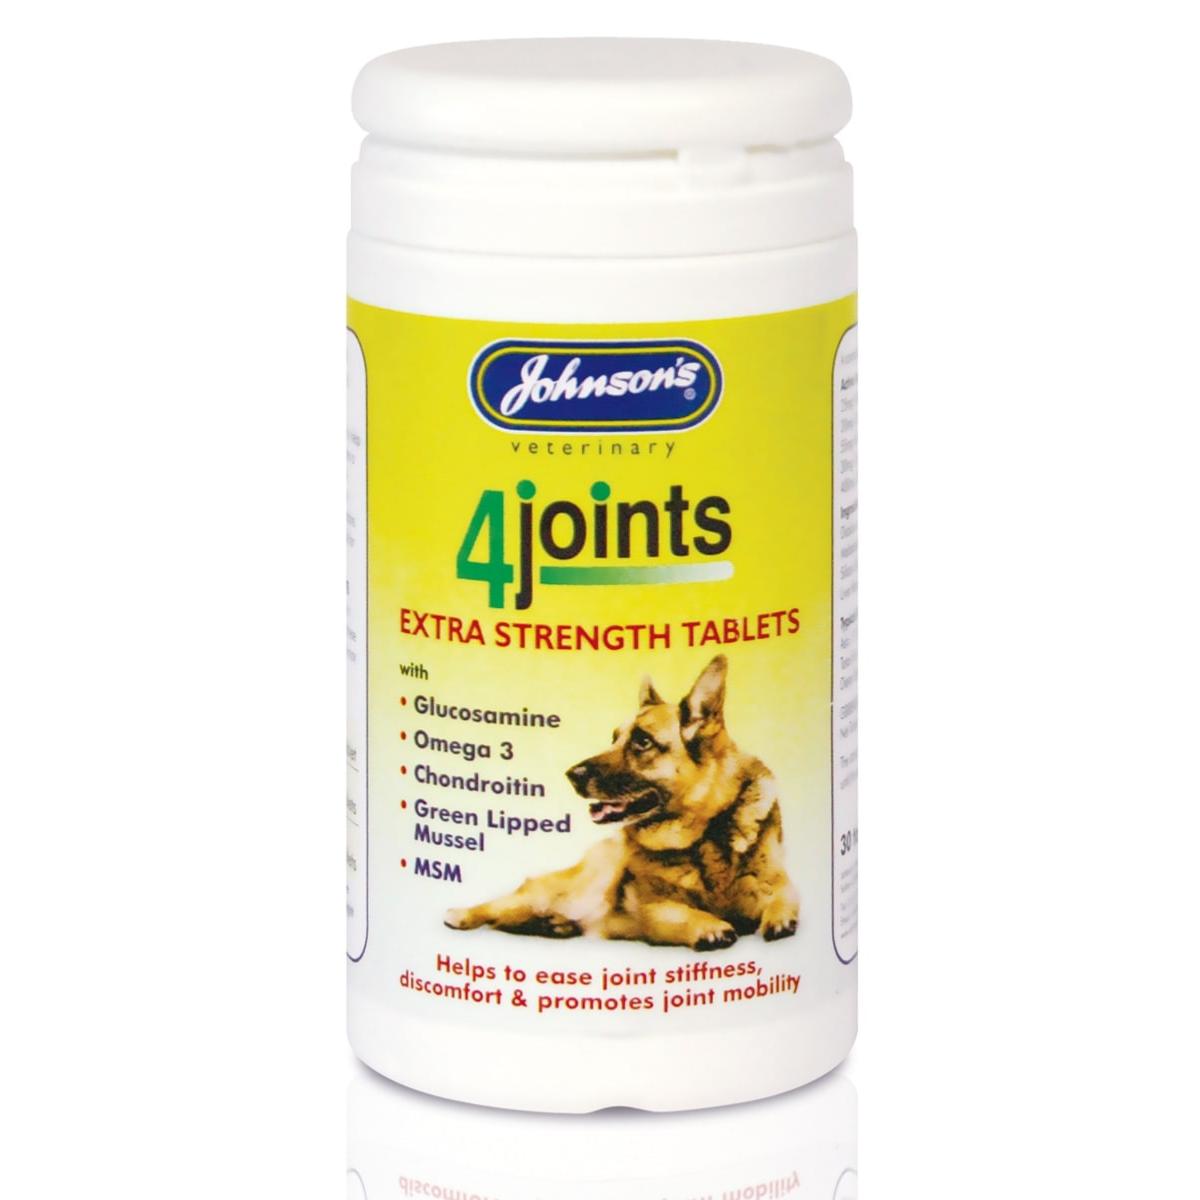 Johnson's Veterinary | Dog Joint Supplement | 4Joints Mobility Extra Strength Tablets - 30 Pack